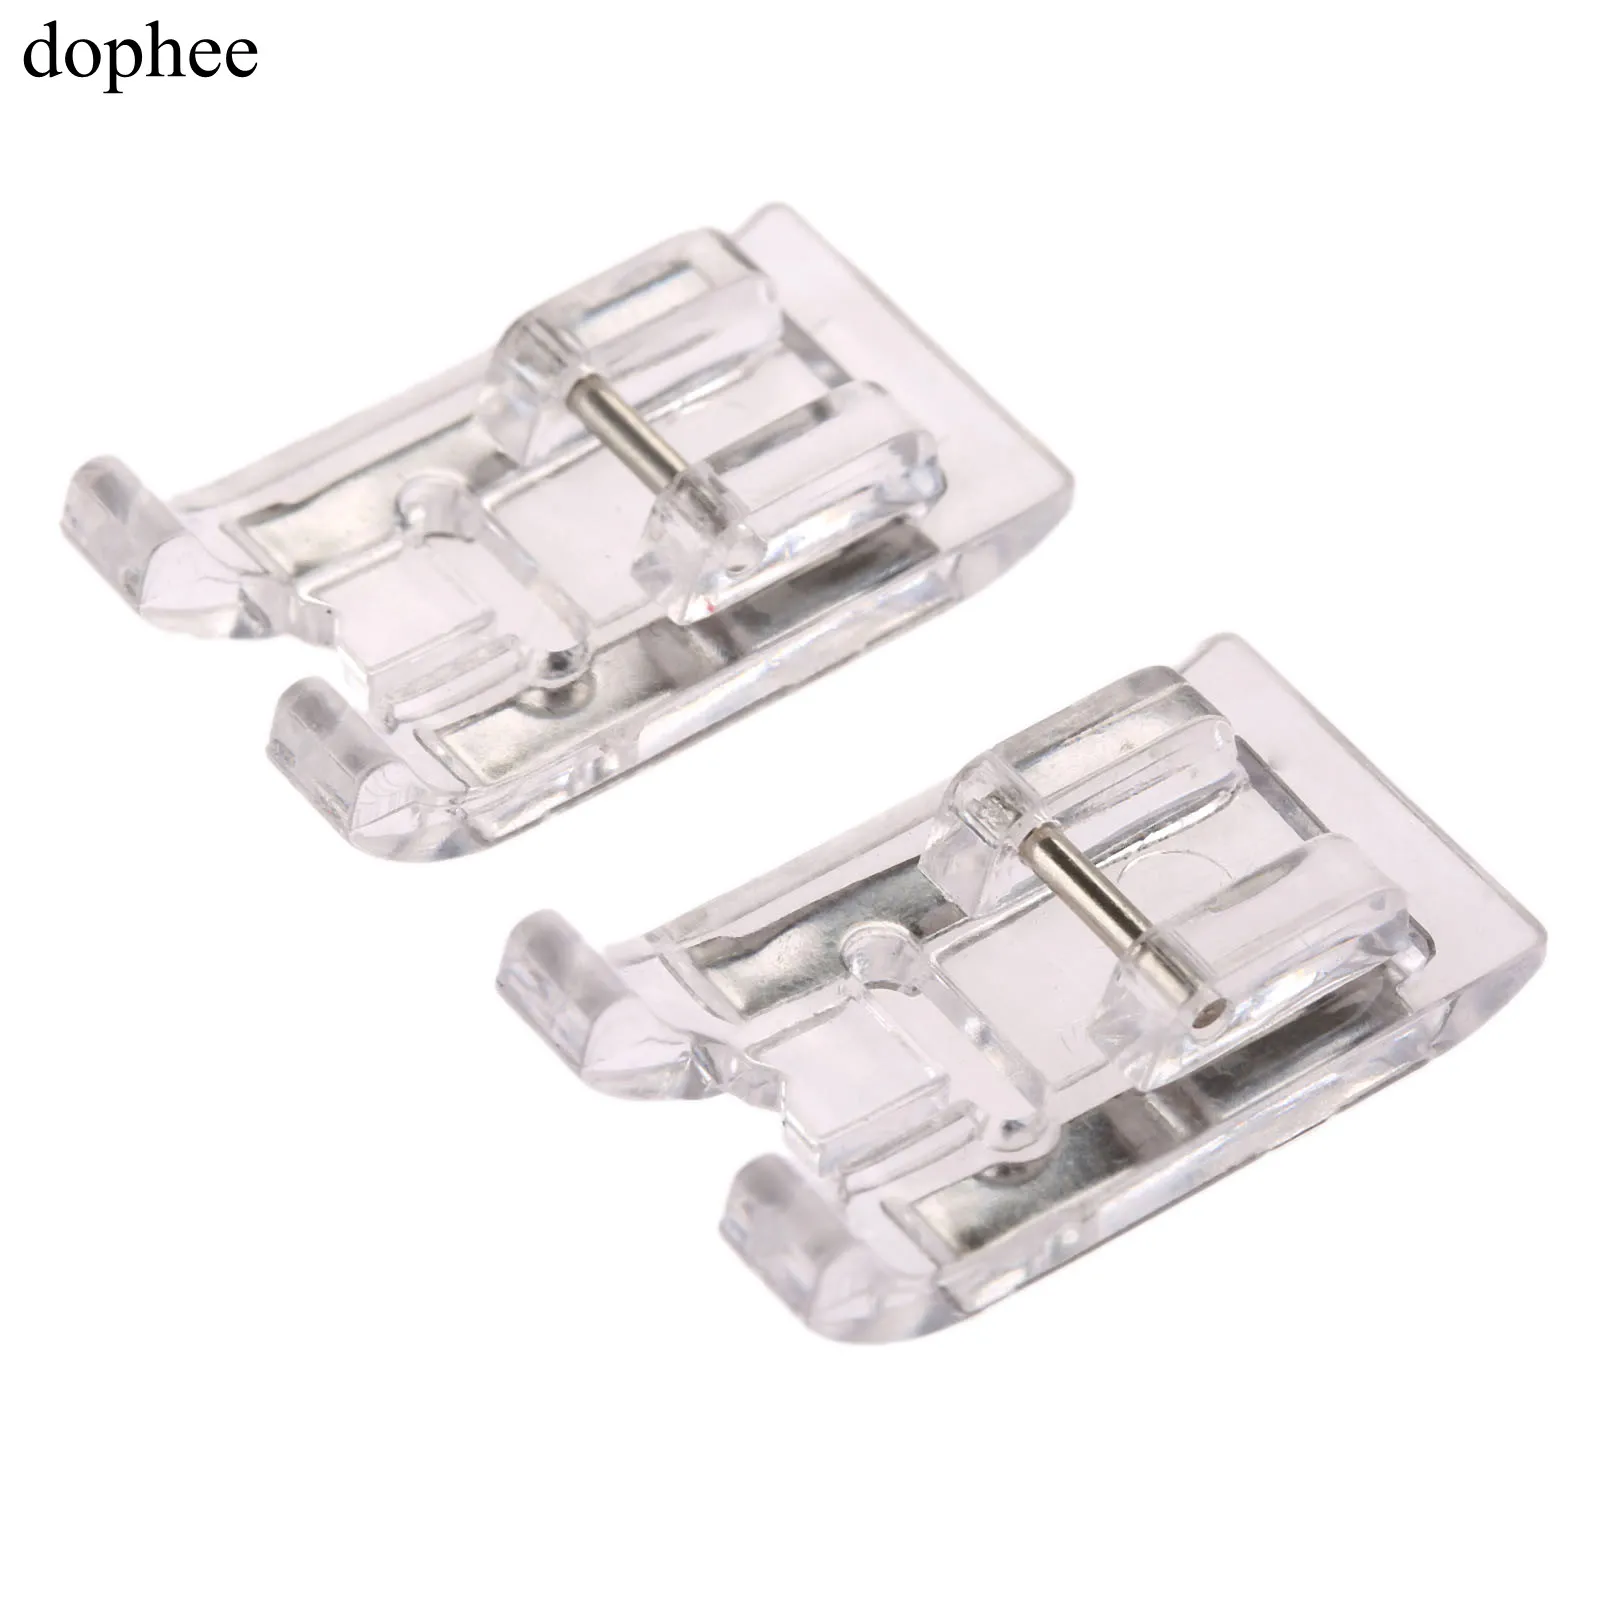 

dophee Domestic sewing Satin Stitch Foot presser foot For Brother For Singer Janome Sewing Machines Snap-on Sewing Presser Foot